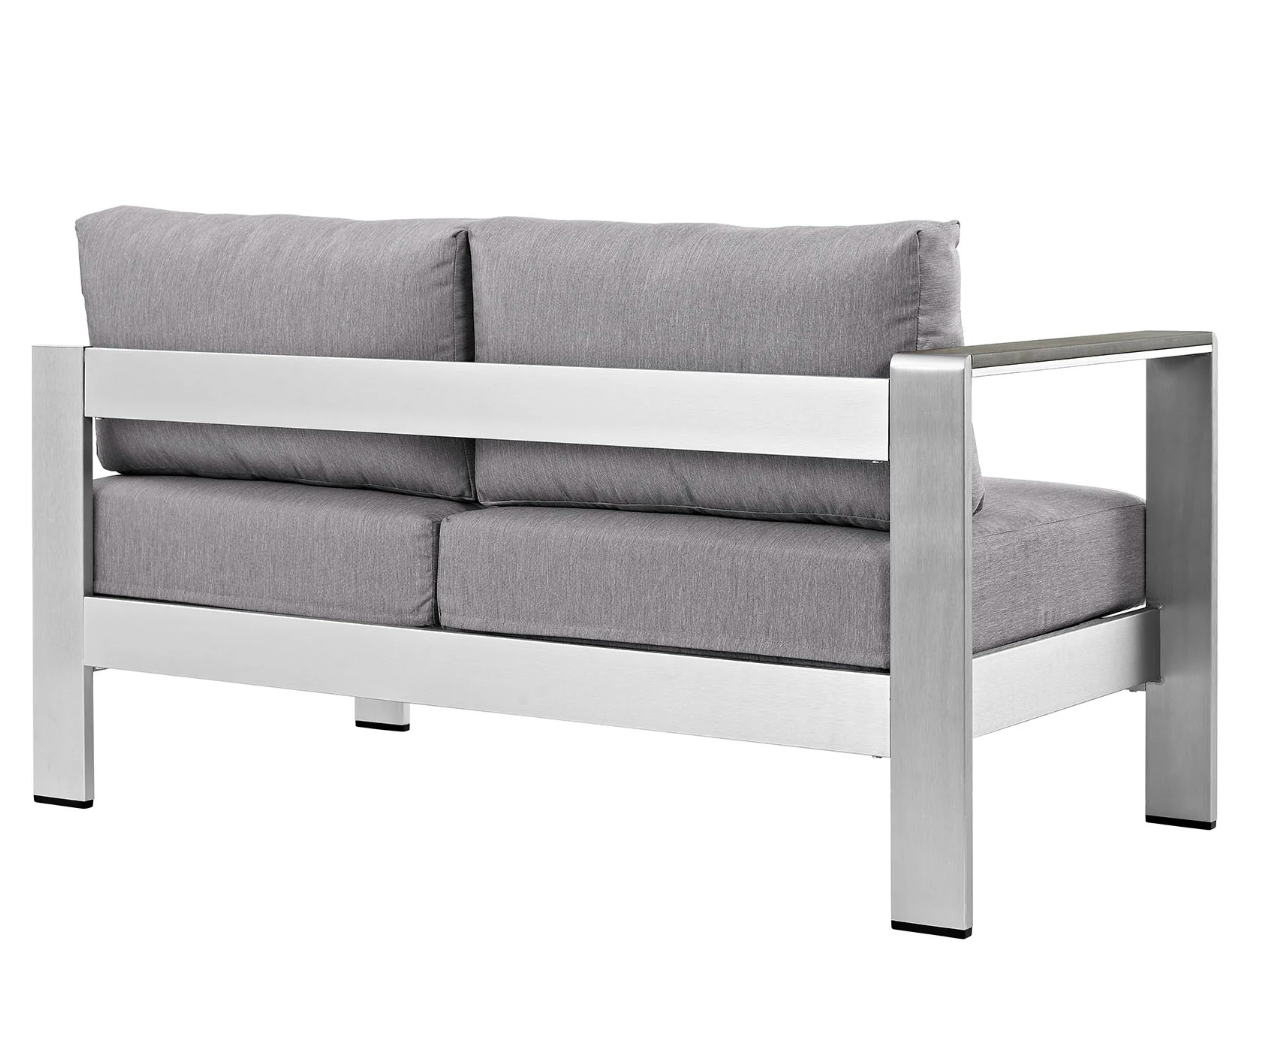 Grey and Silver Aluminum Corner Sectional Outdoor Sofa